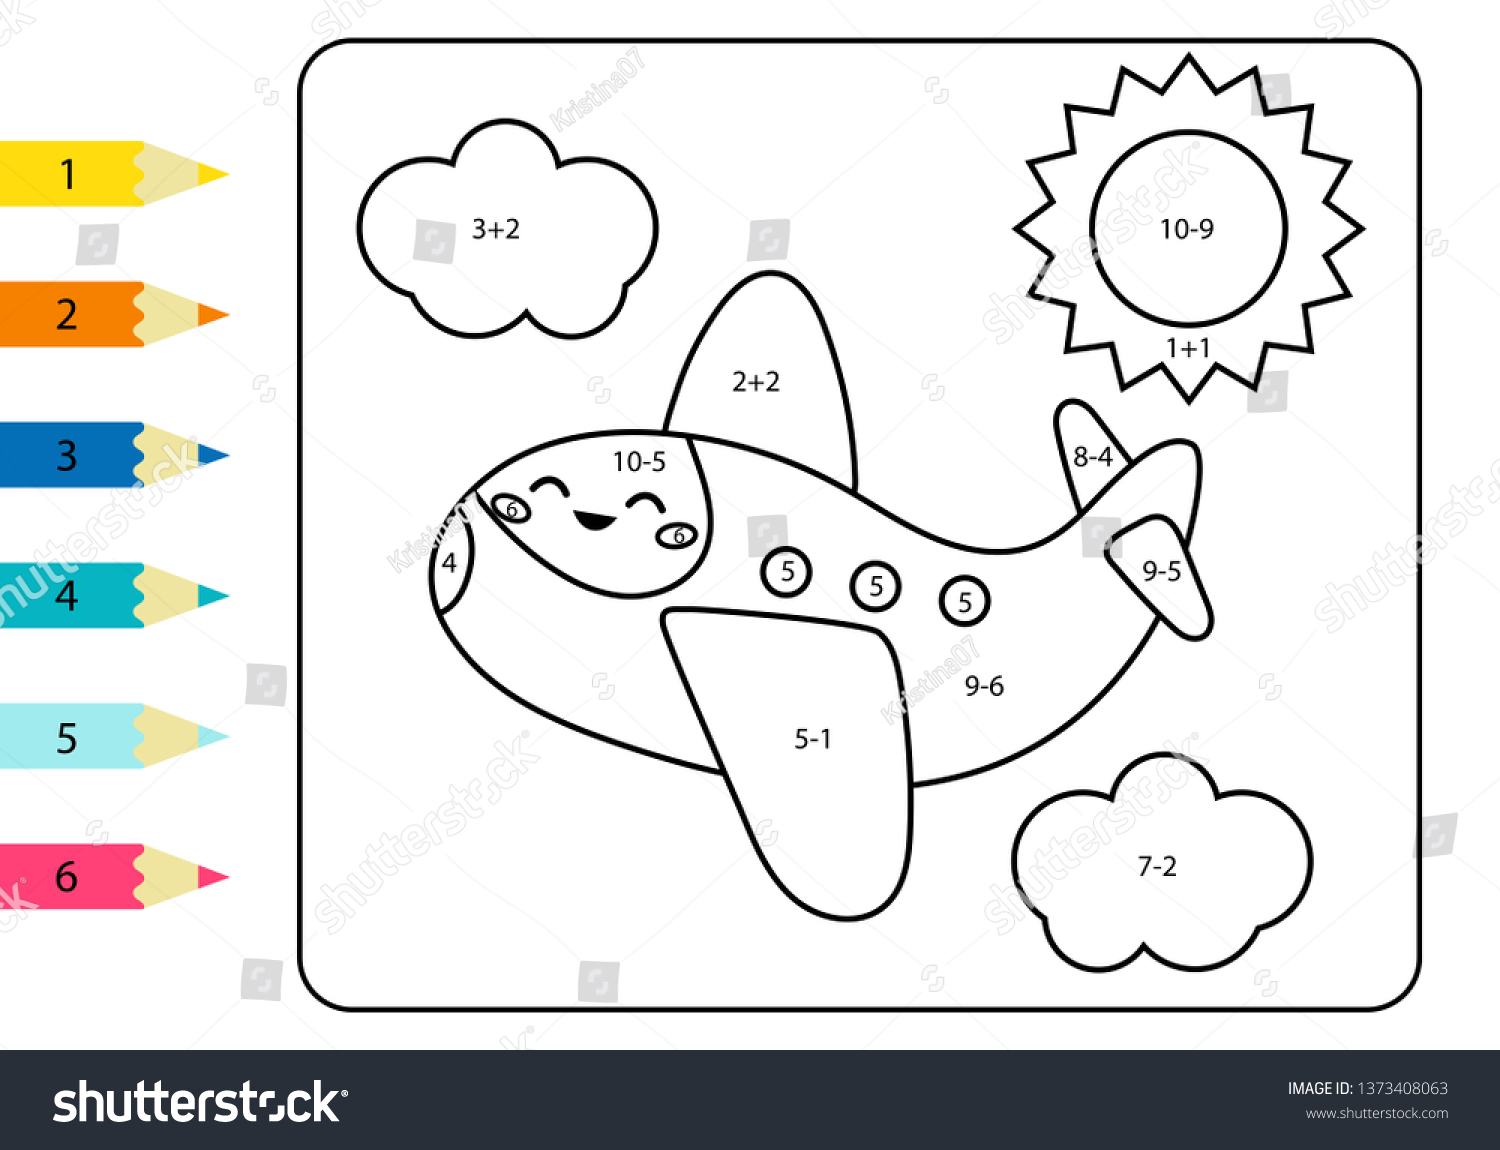 coloring page by addition subtraction numbers stock vector royalty free 1373408063